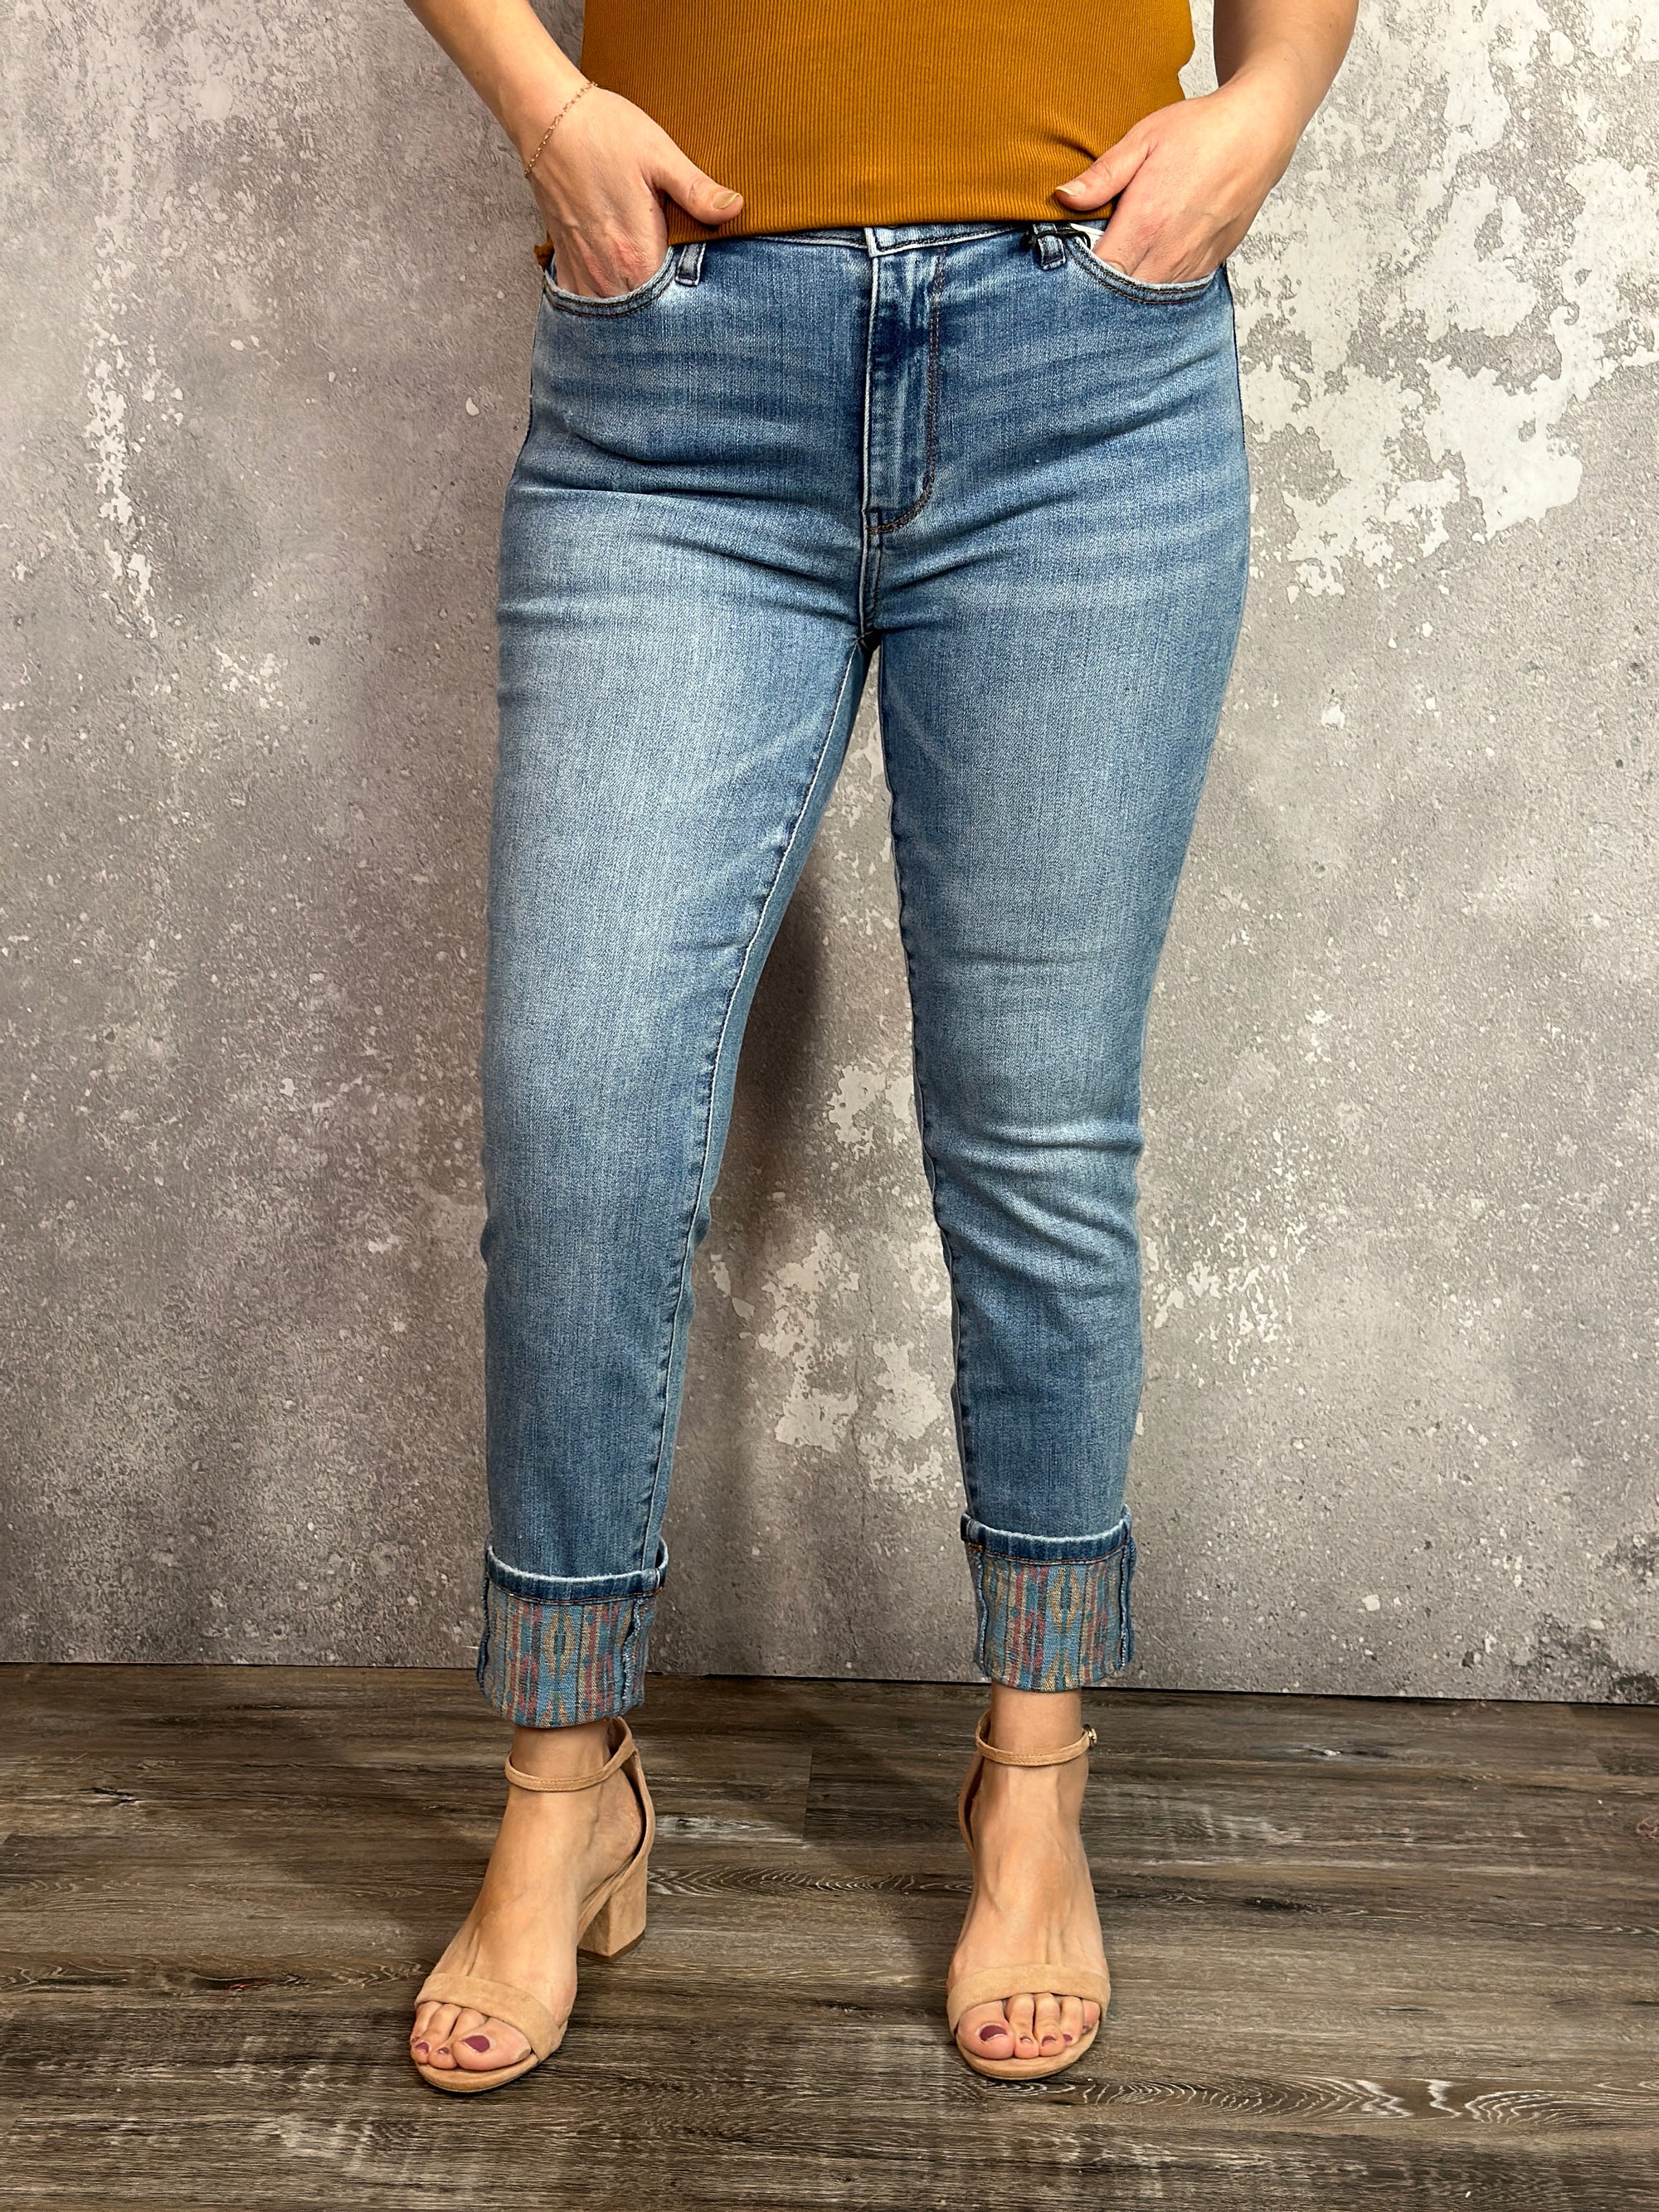 Judy Blue Light Wash Relaxed Fit Jean with Geo Lining (sizes 28-20W)